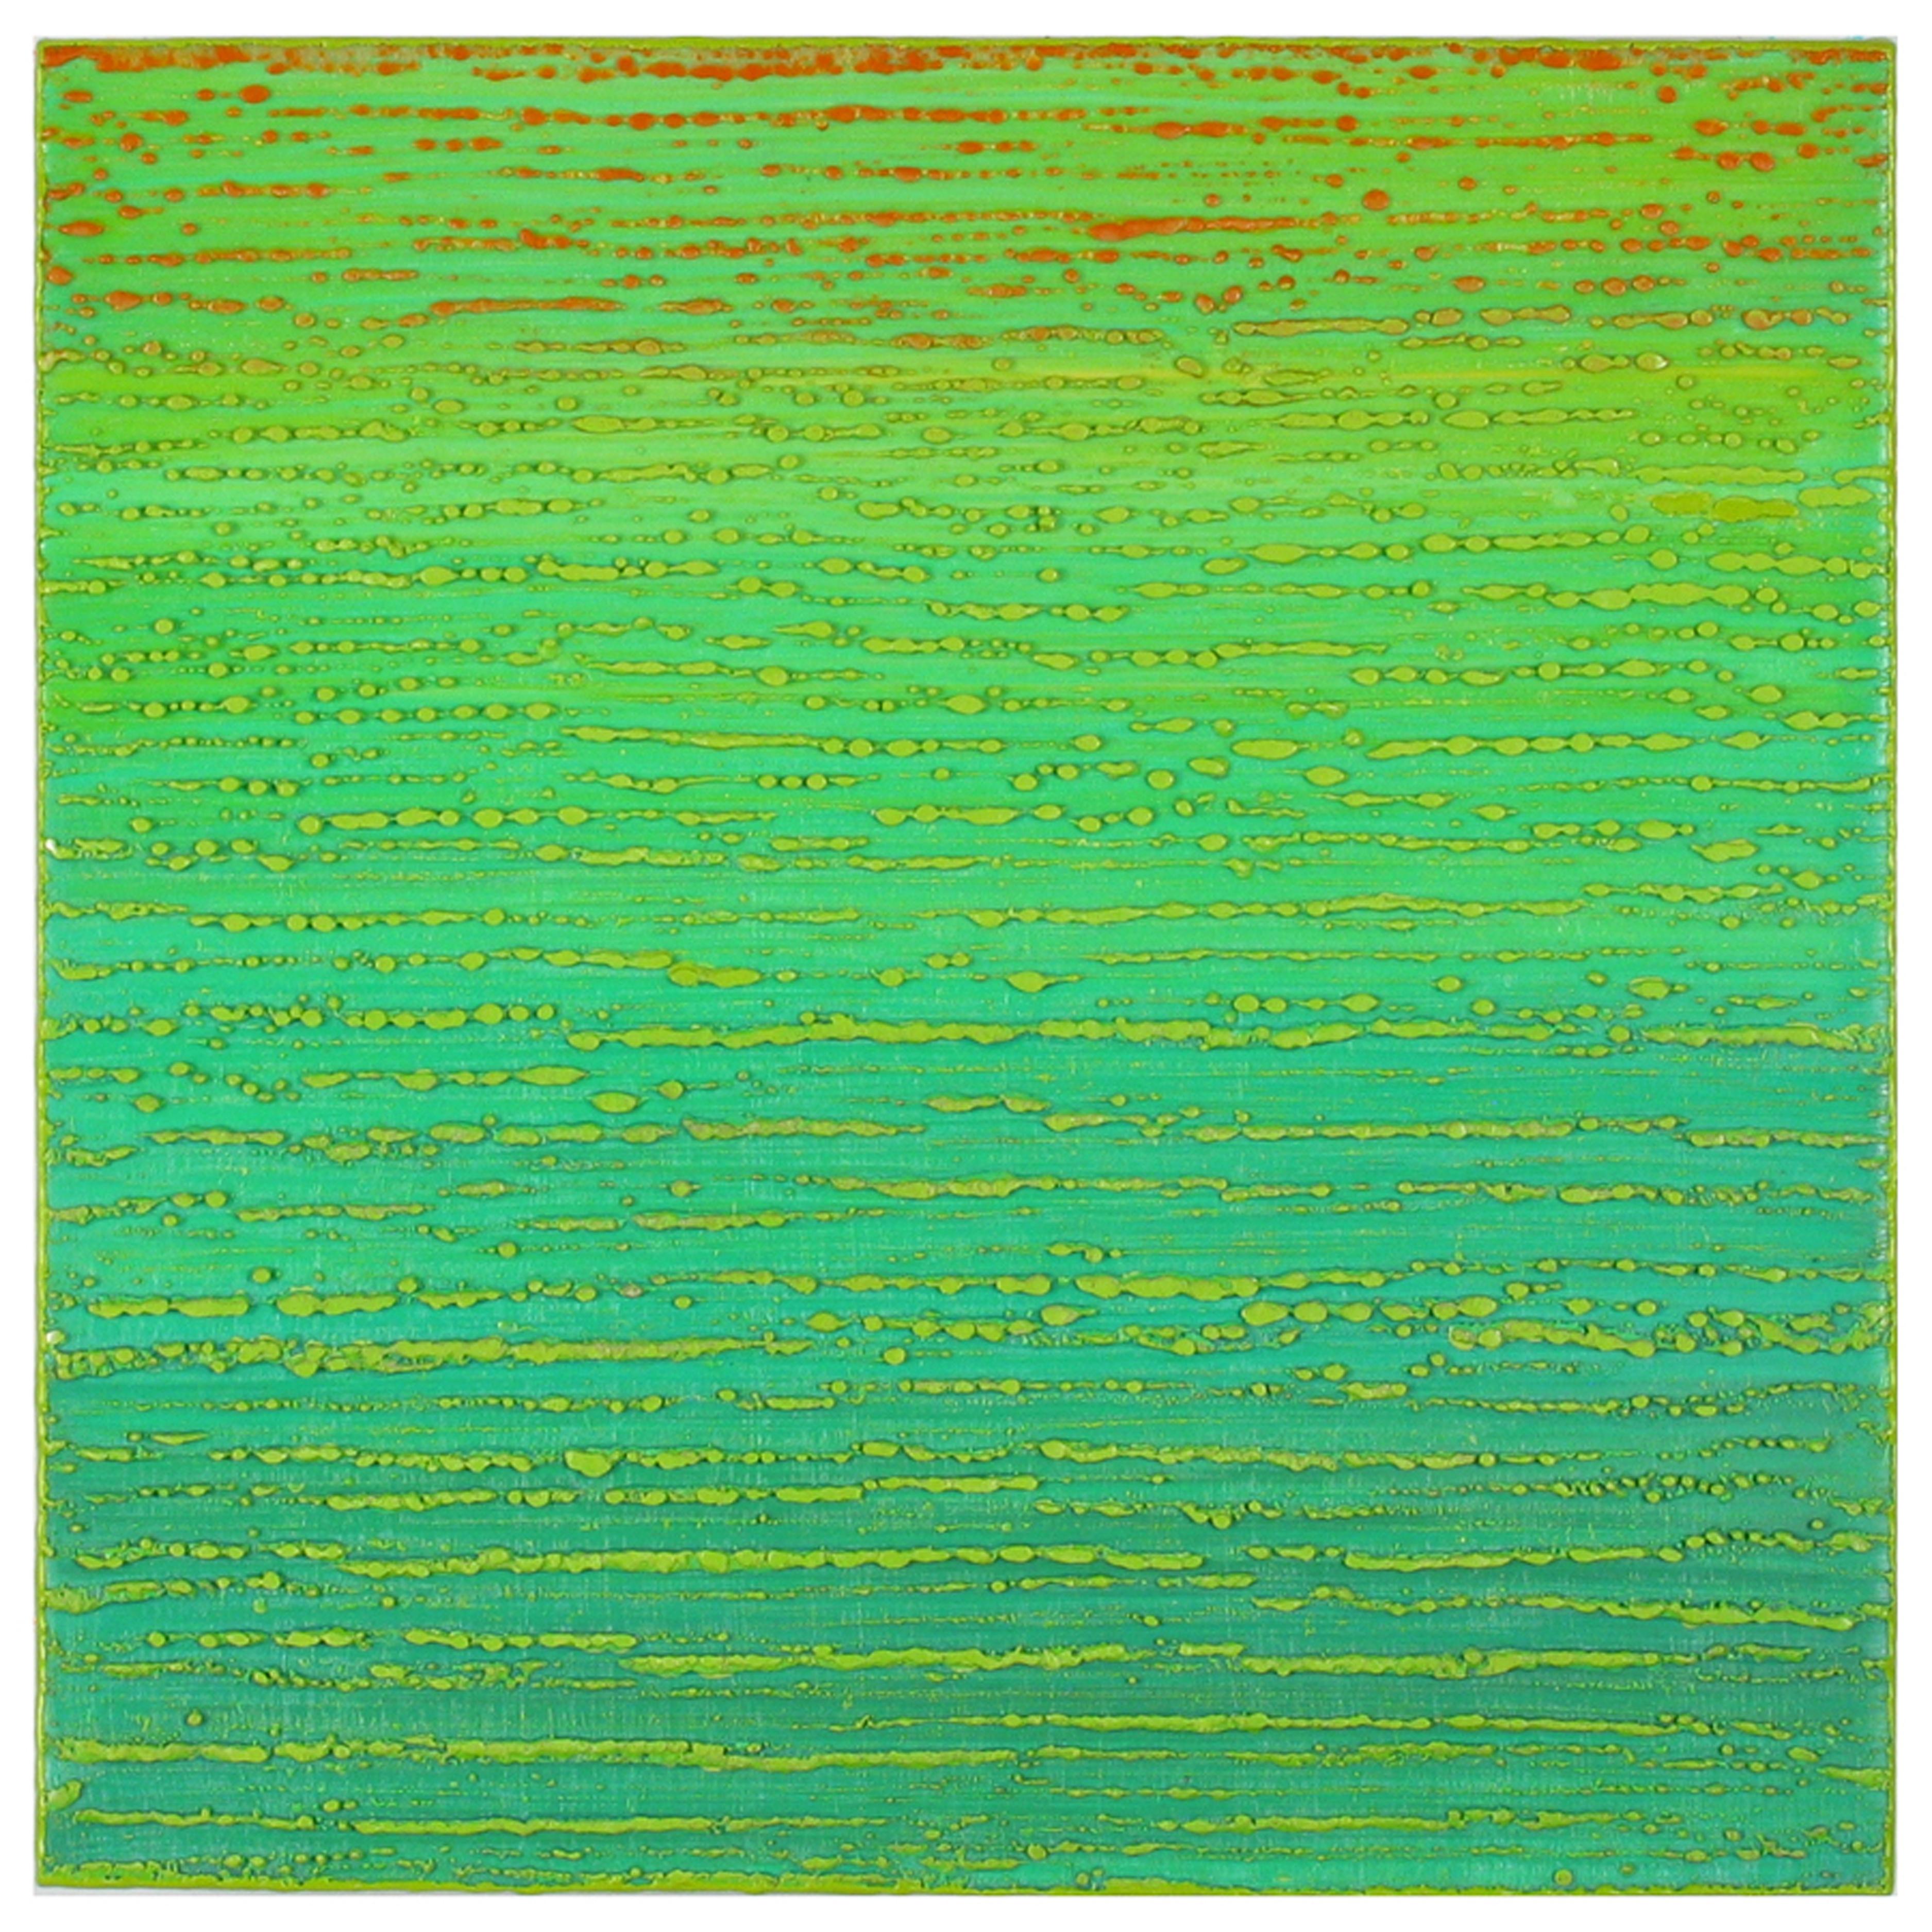 Joanne Mattera Abstract Painting - Silk Road 449, 2019, encaustic on panel, 12 x 12 x 2 inches